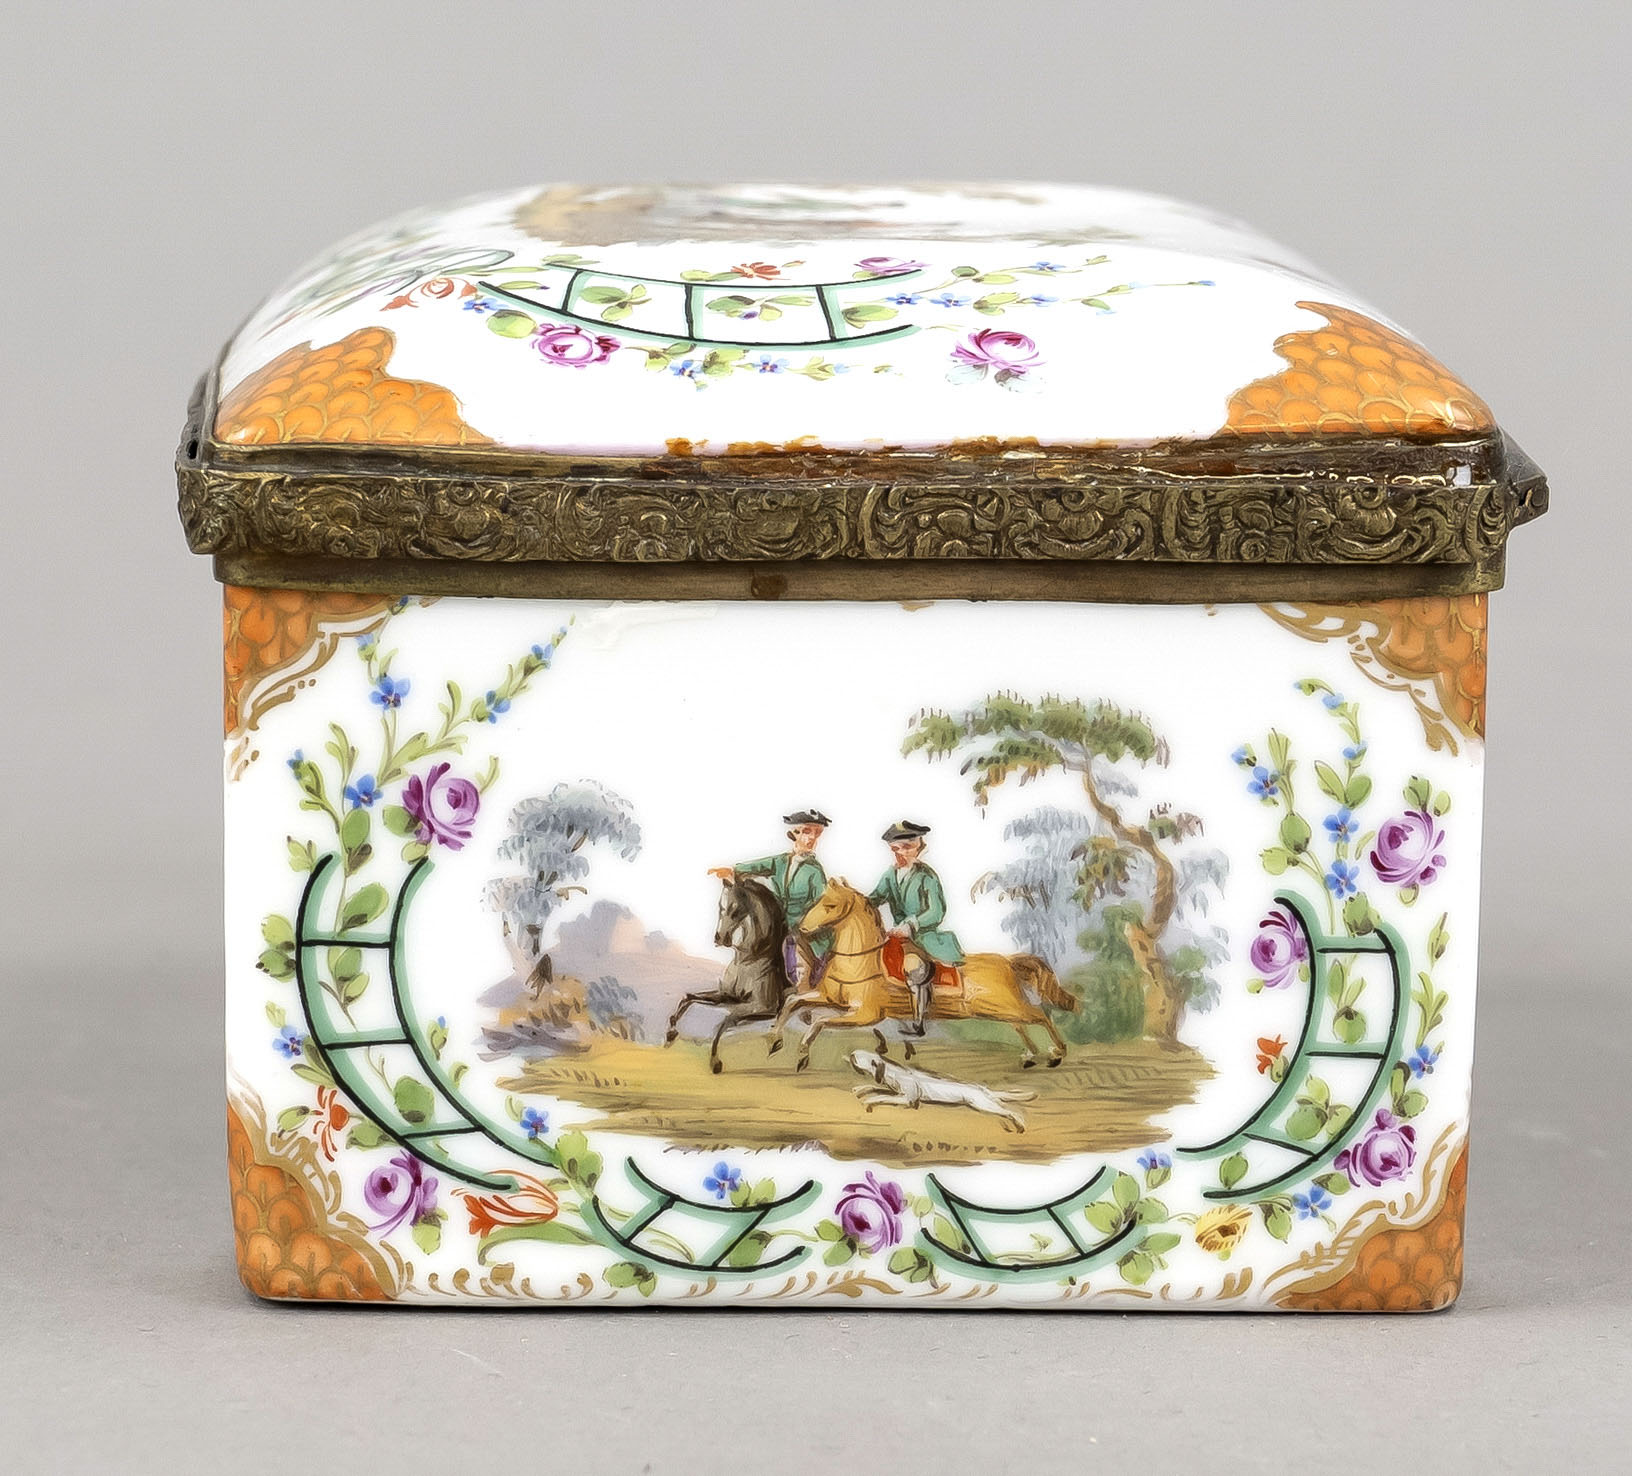 Lidded box in the style of 18th century KPM Berlin, unmarked, rectangular form with hinged, slightly - Image 6 of 7